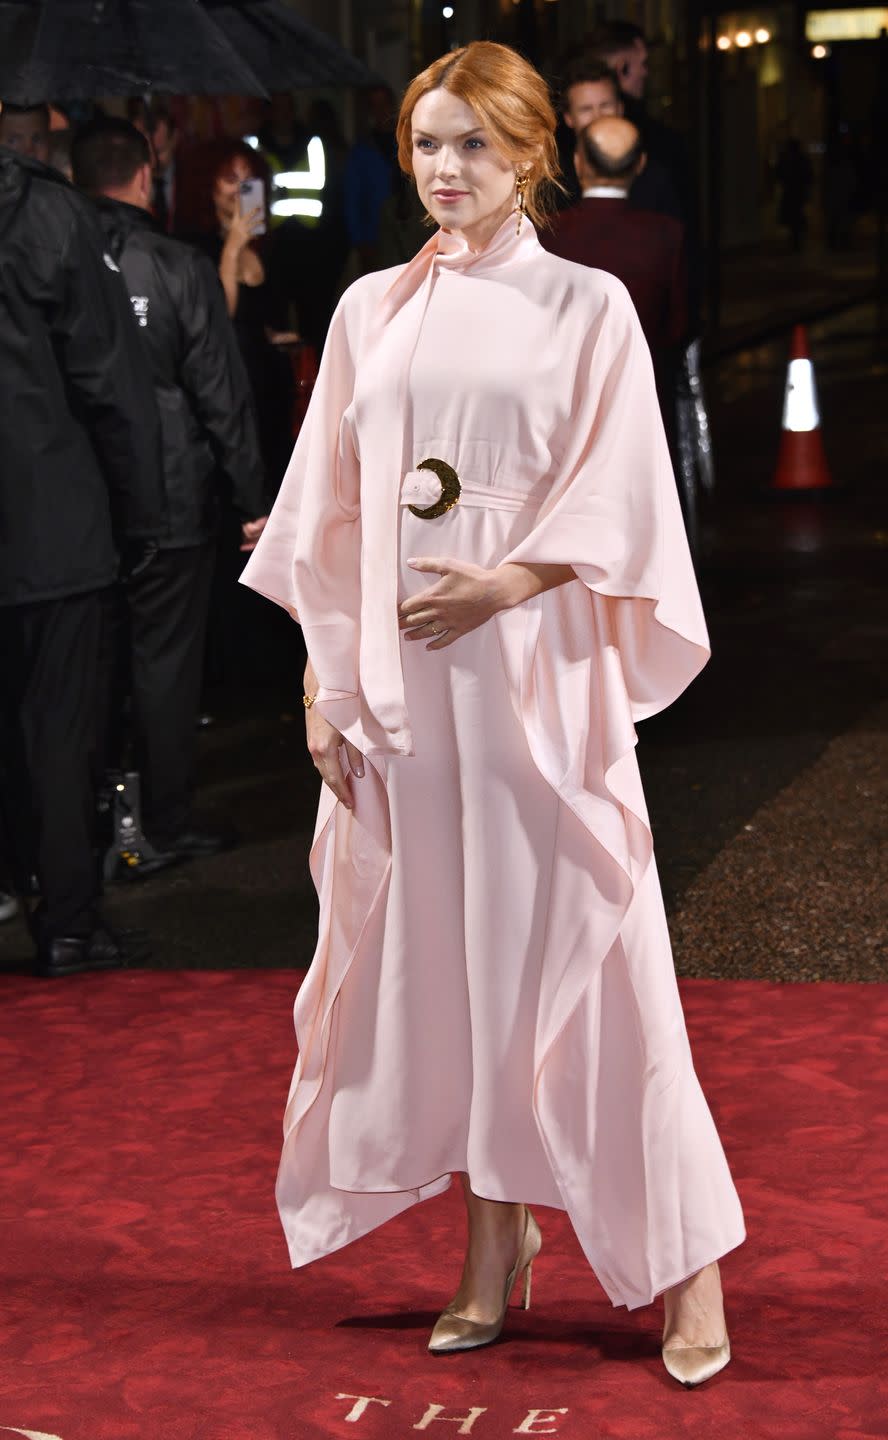 <p>Erin Richards announced her pregnancy at <em>The Crown </em>premiere. In the latest season, she portrays Kelly Fisher, Dodi Al Fayed's girlfriend. She chose a flowing blush pink gown for the occasion. </p>